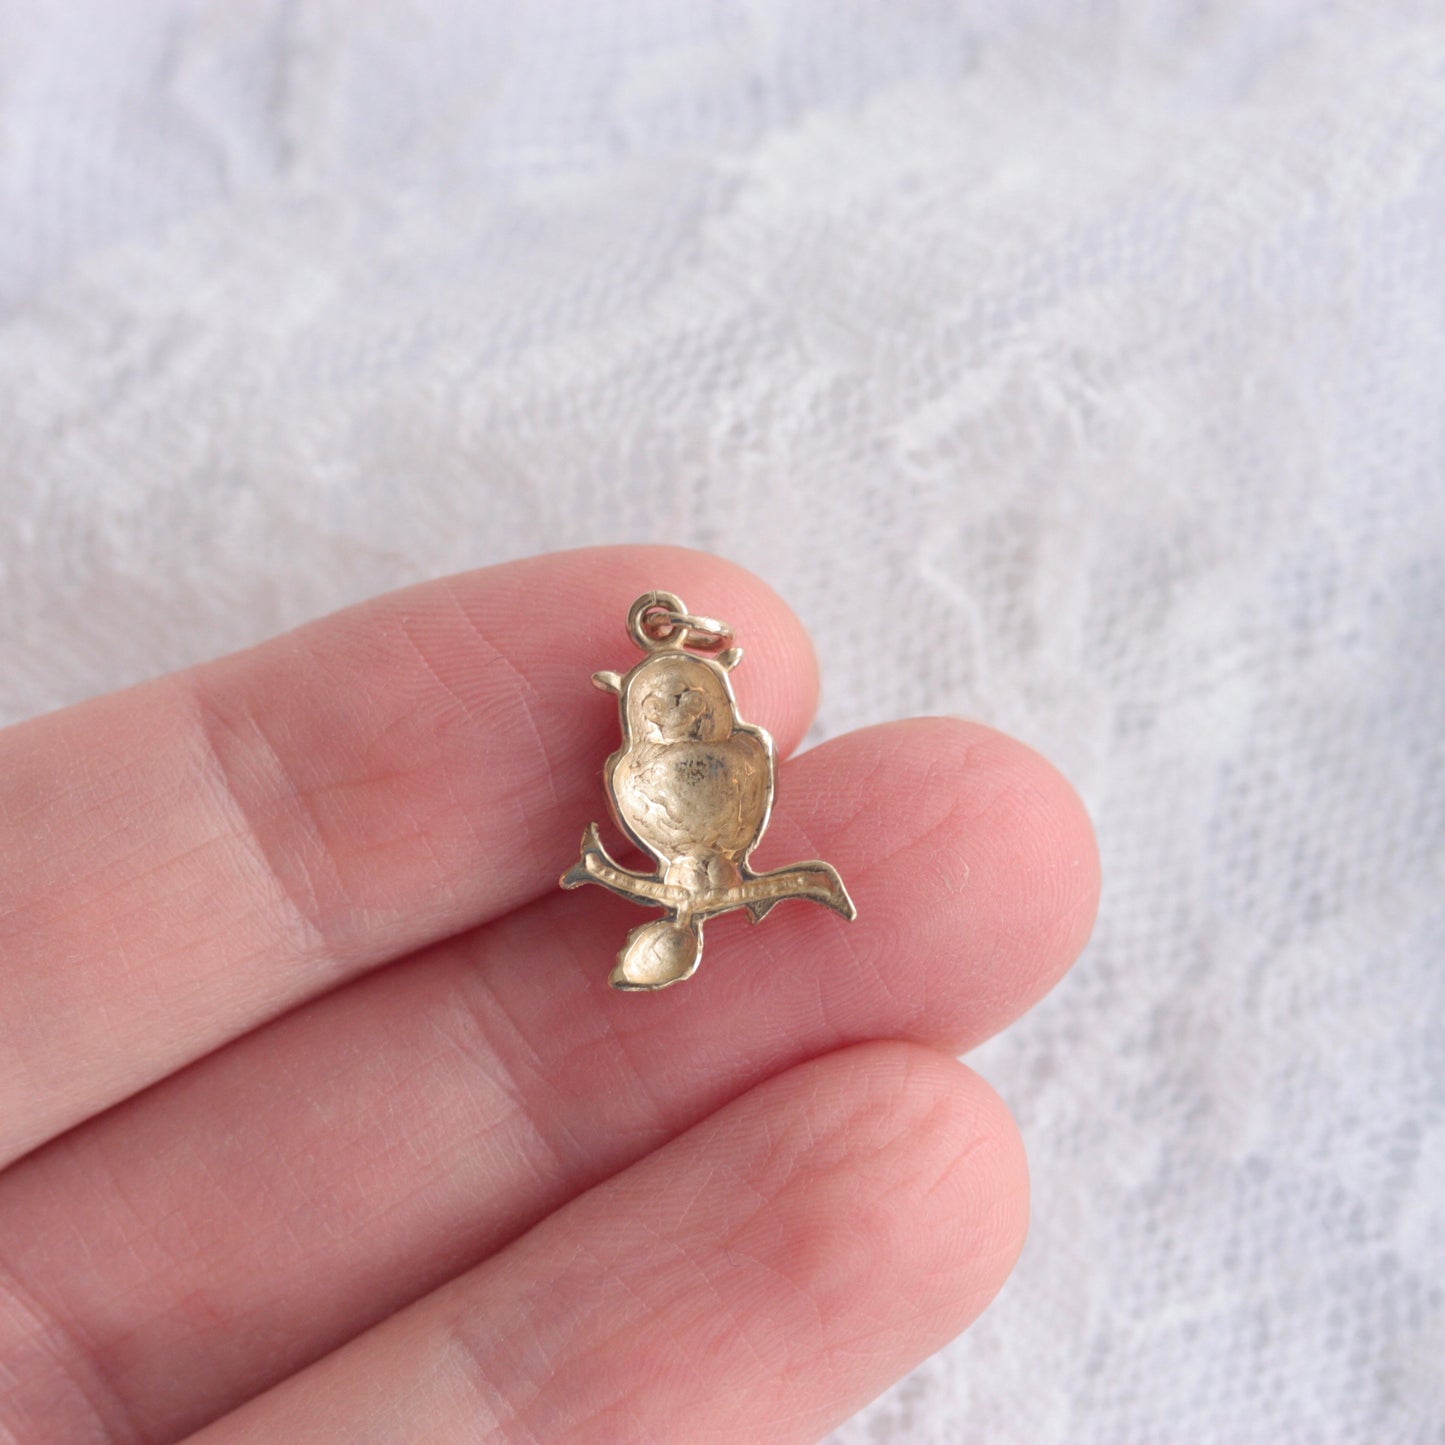 Vintage Small 9ct Gold Charm / Pendant, 1991